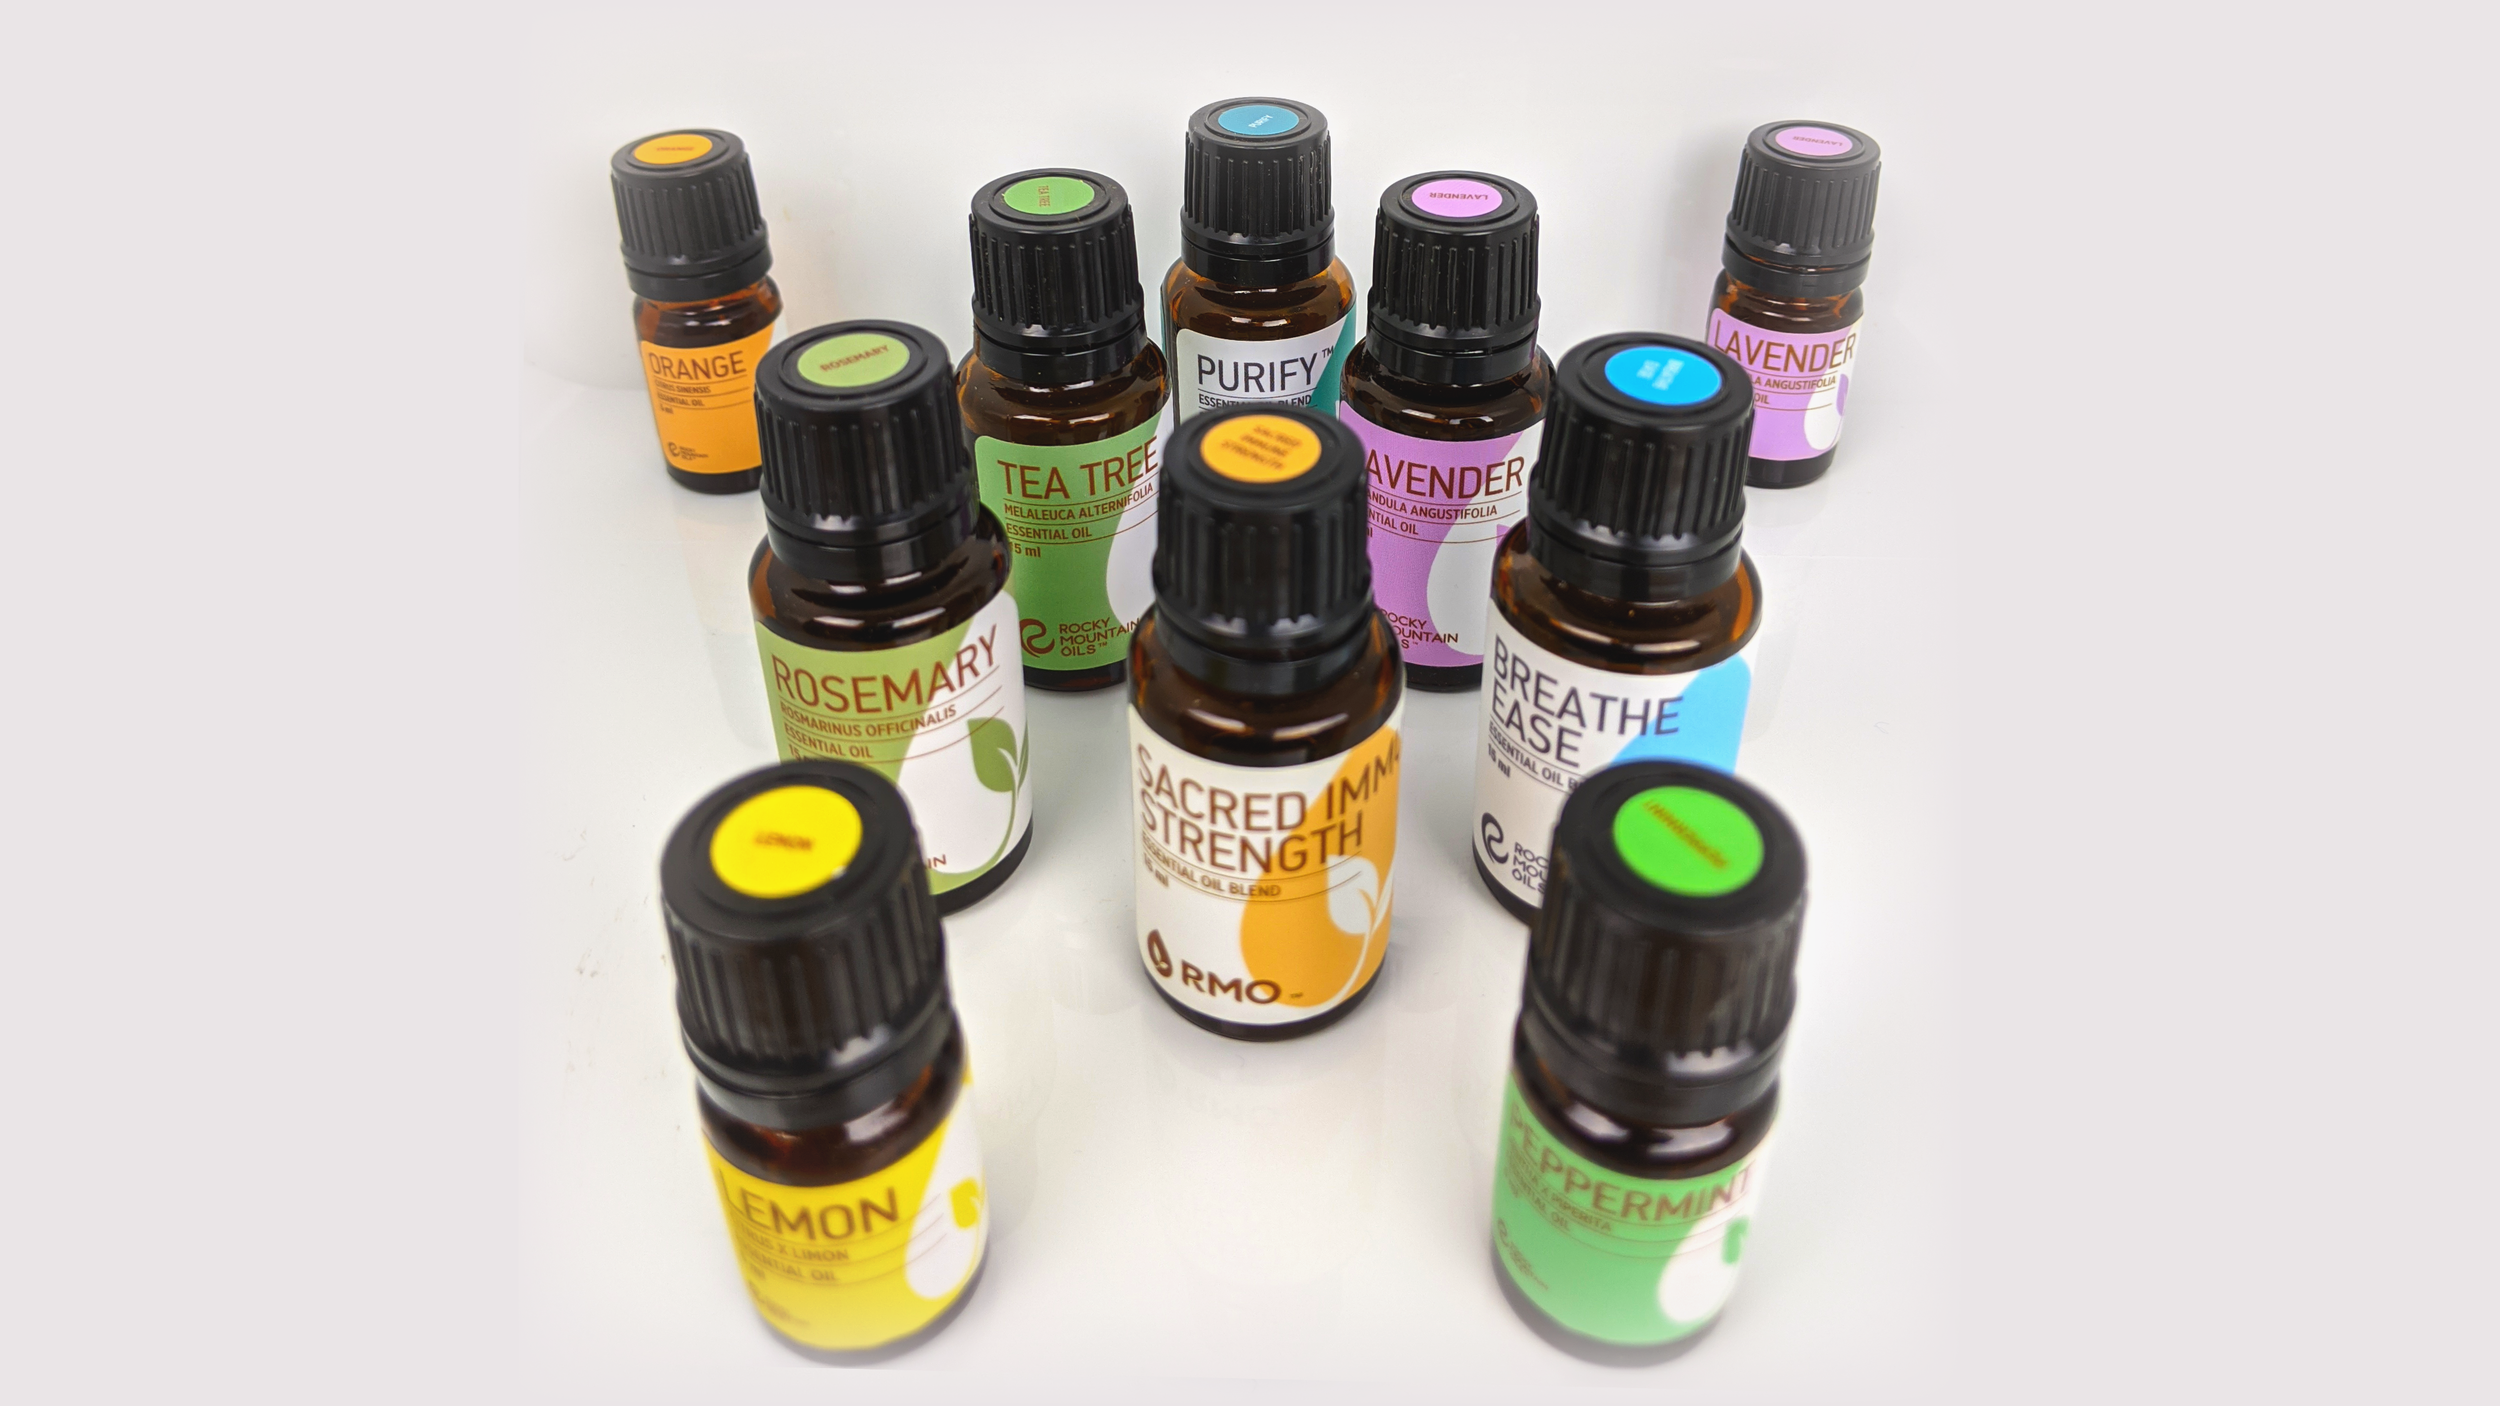 I use a different essential oil in my liquid laundry detergent each time, personally. But I always buy my oils from Rocky Mountain Oils. Click the image to see their selection.